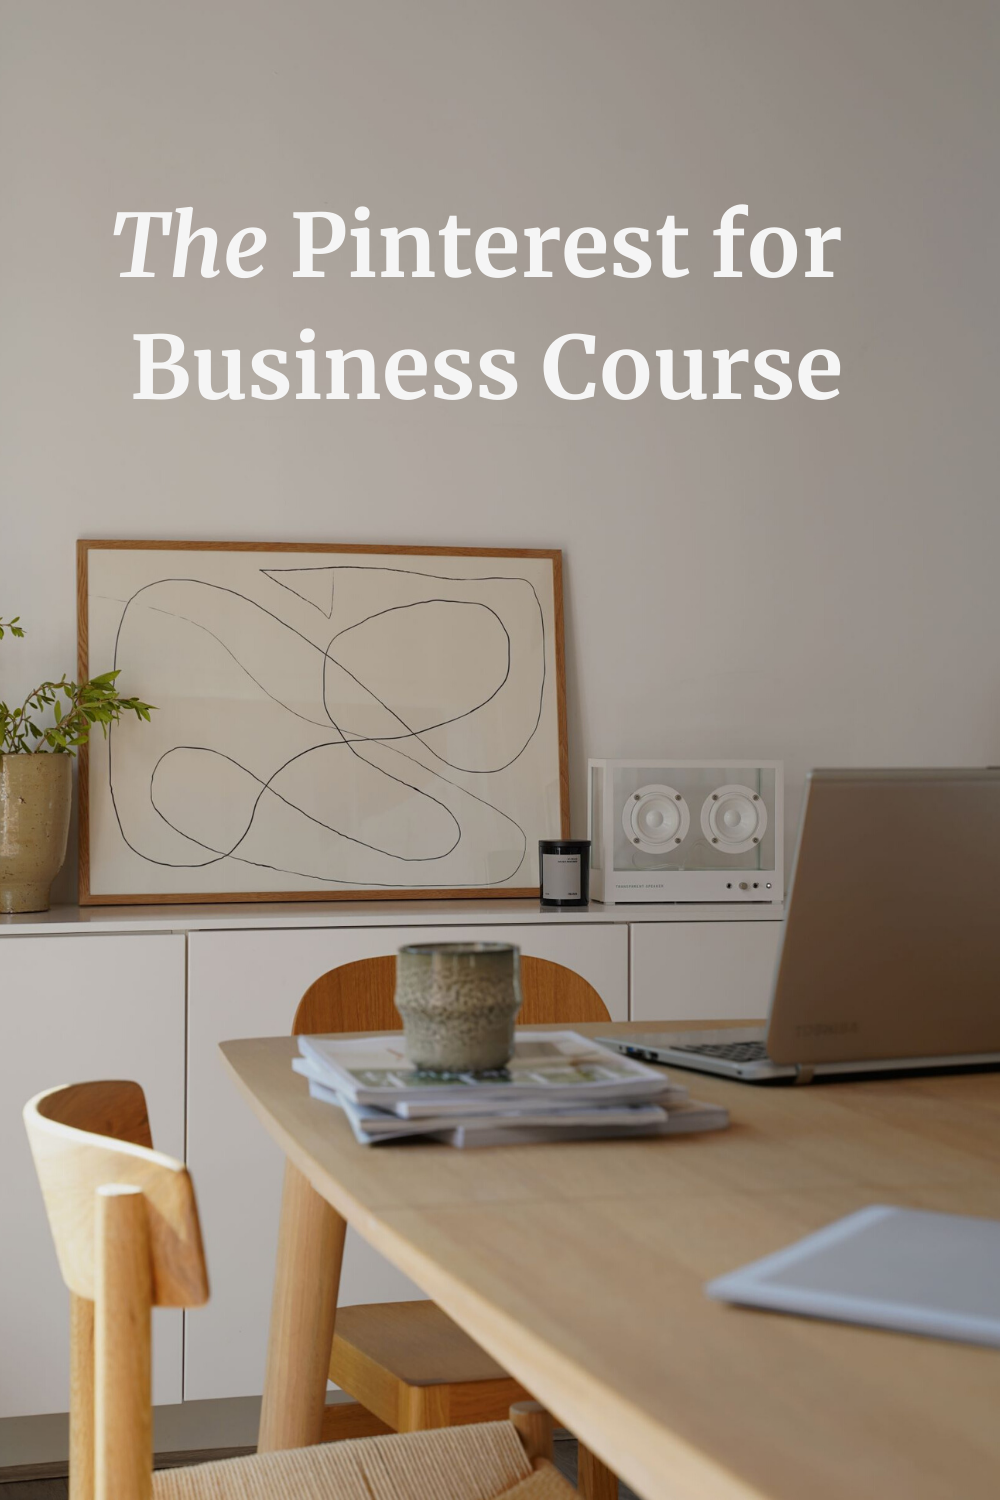 The Pinterest for Business course- learn how to use Pinterest for your business